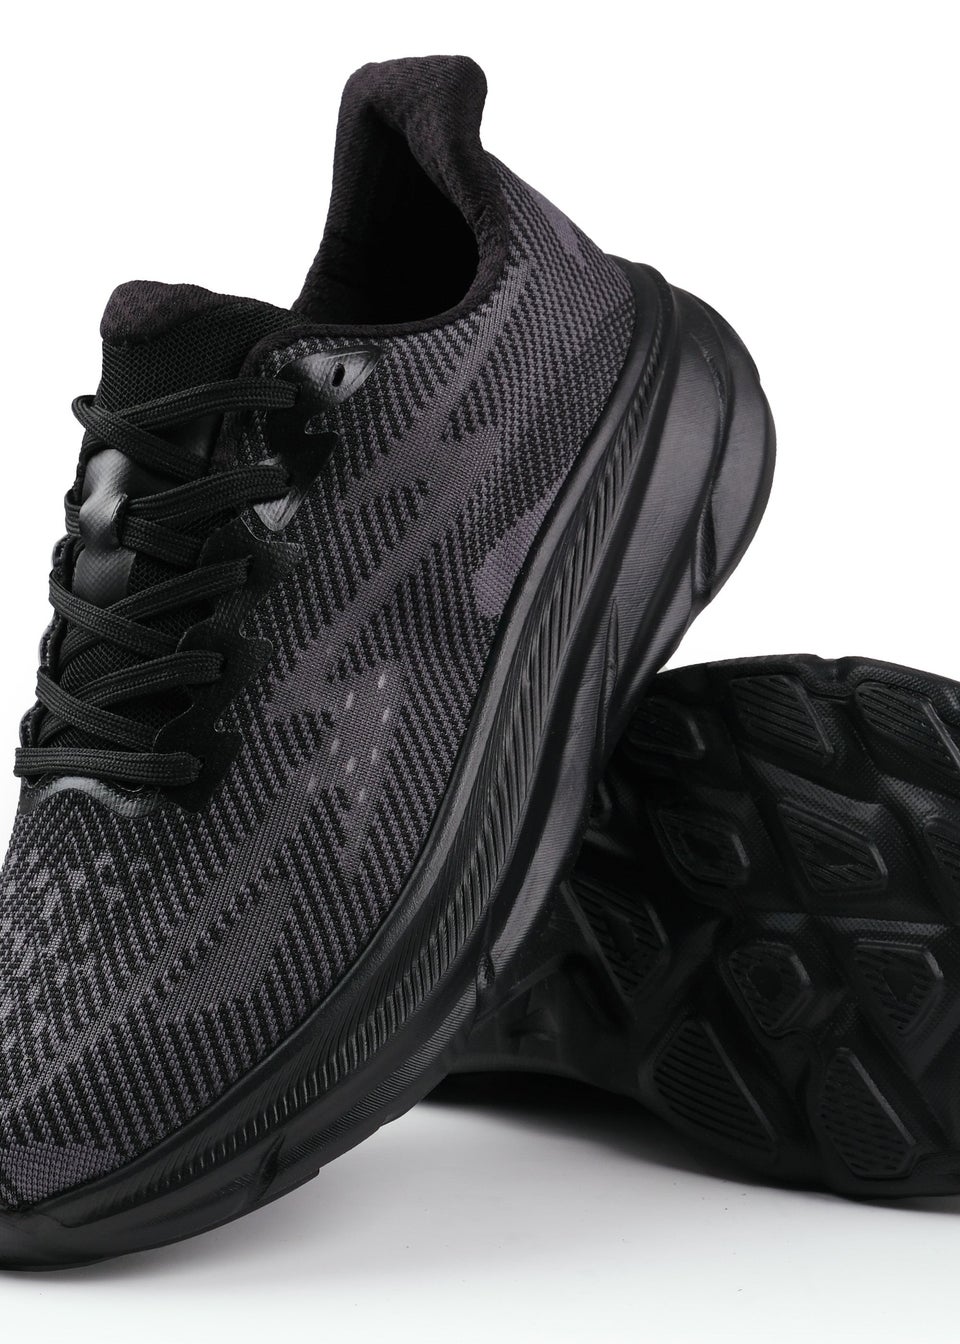 Where's That From Black Track Breathable Mesh Runner Trainers